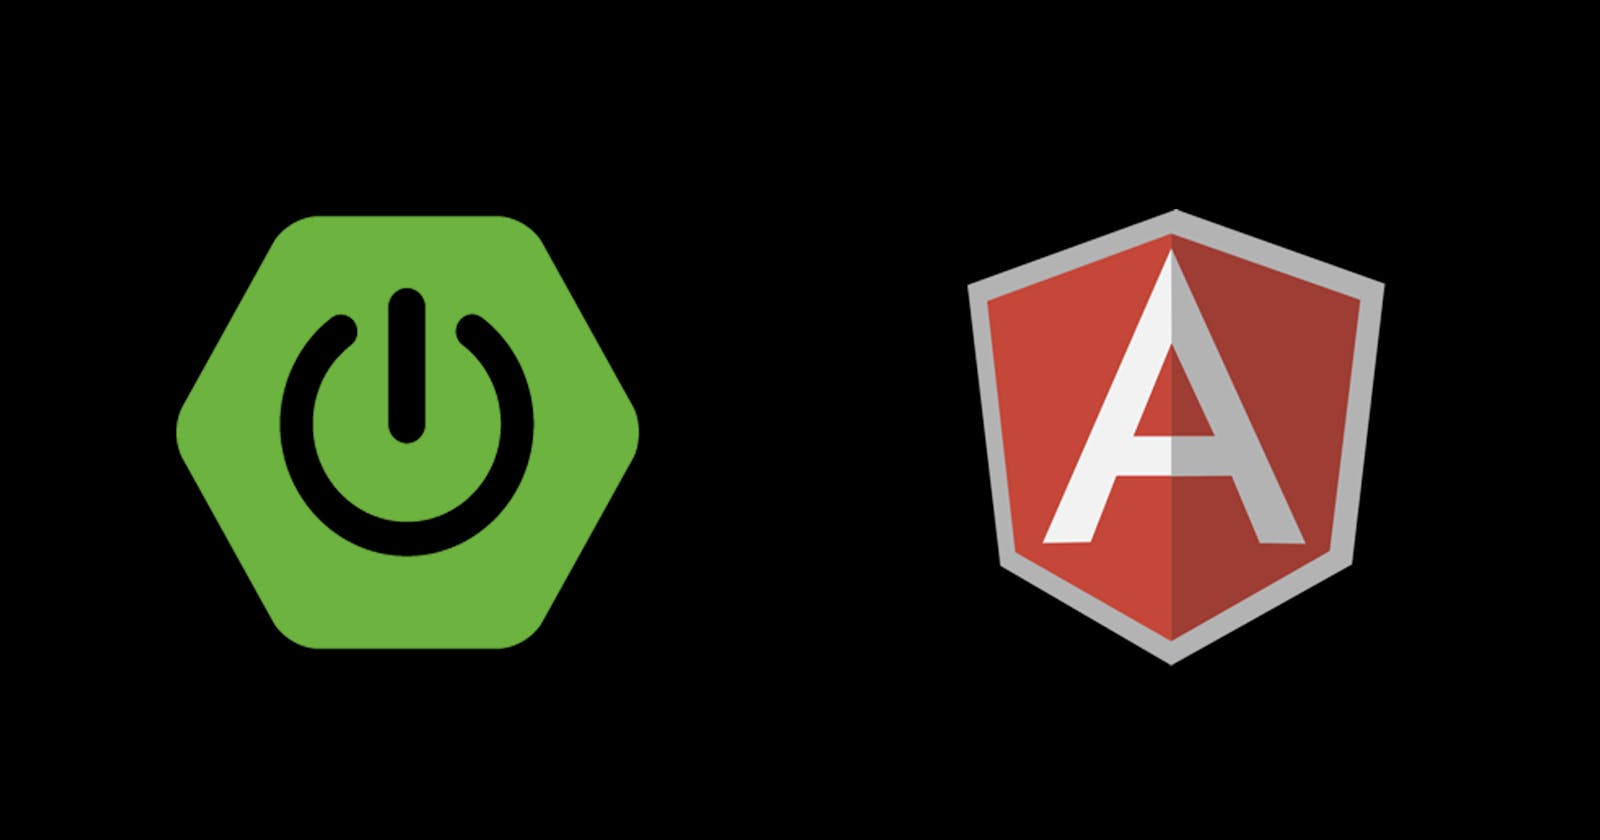 How to make SpringBoot + AngularJS applications run on a single port?